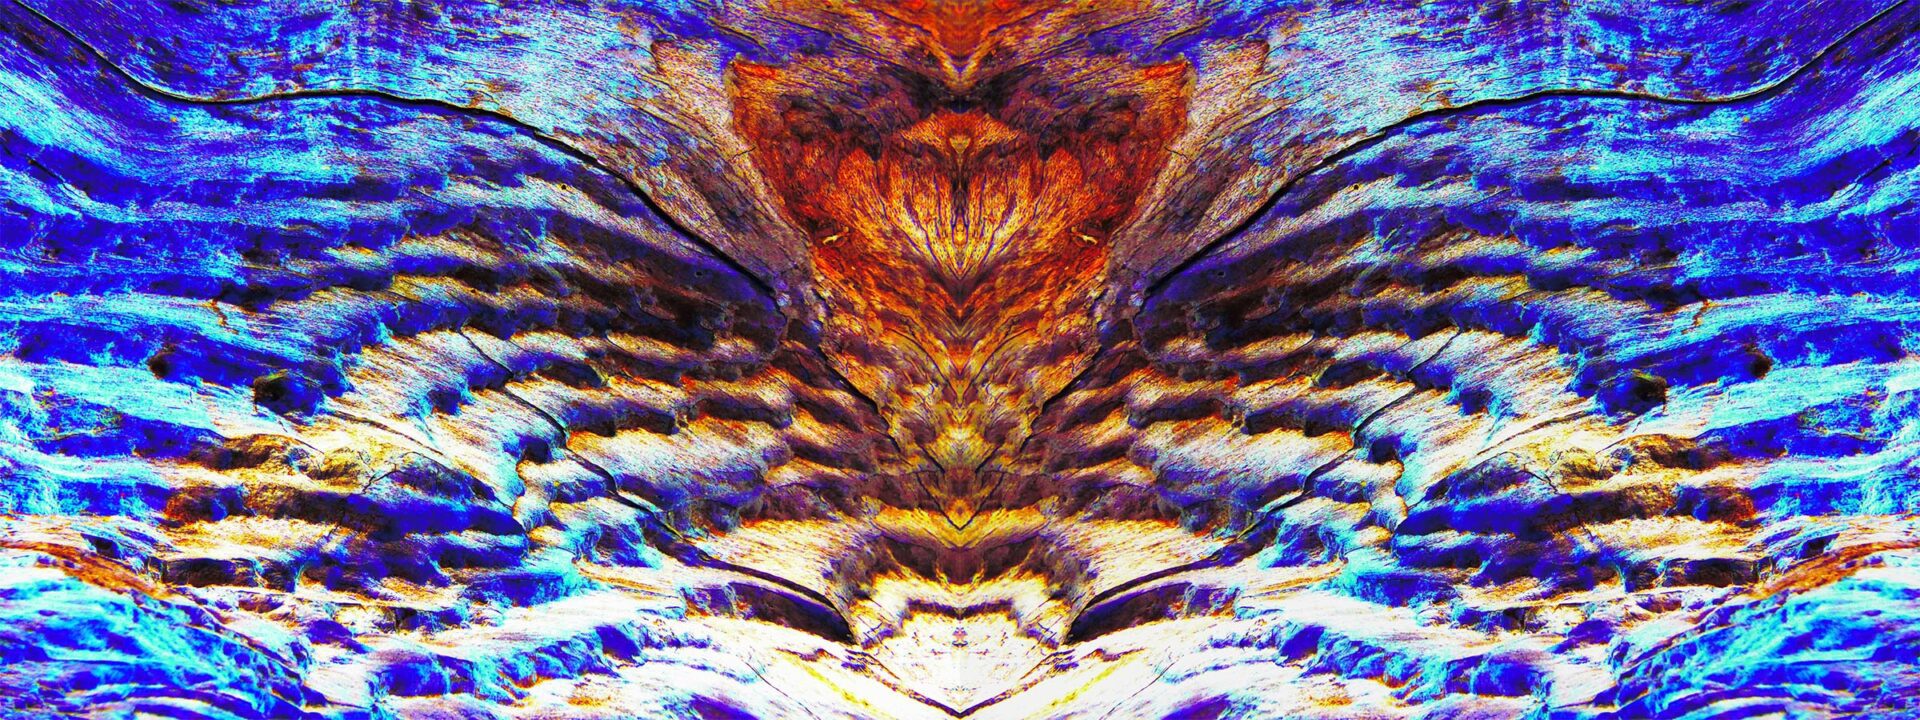 An abstract image of a bird with blue and orange feathers.